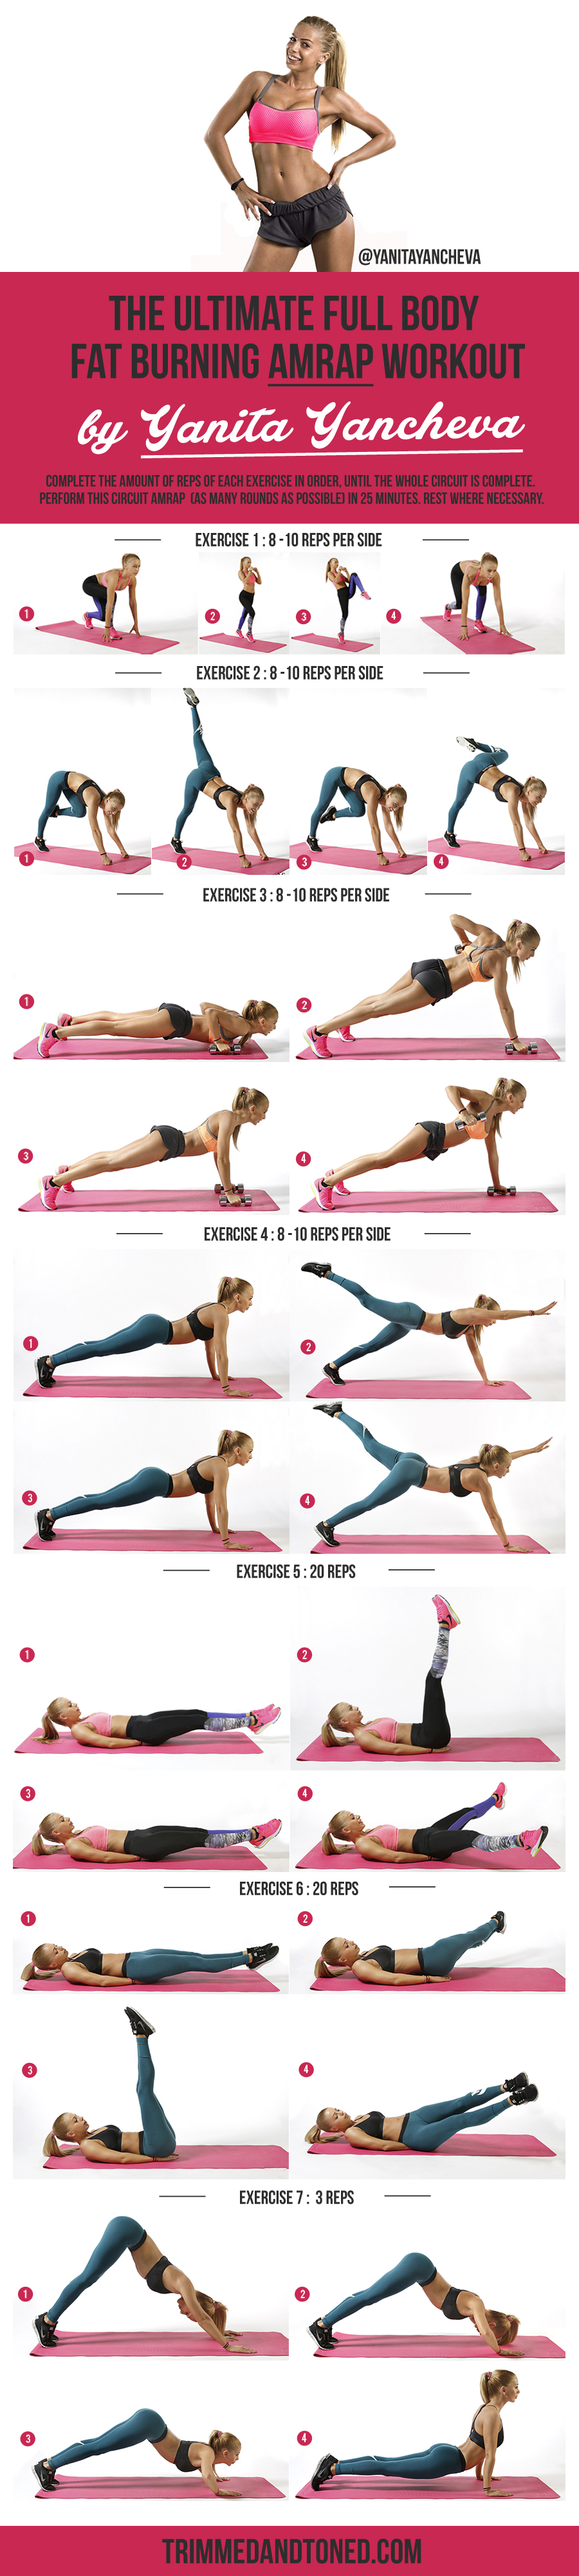 24 Full Body Weight Loss Workouts That